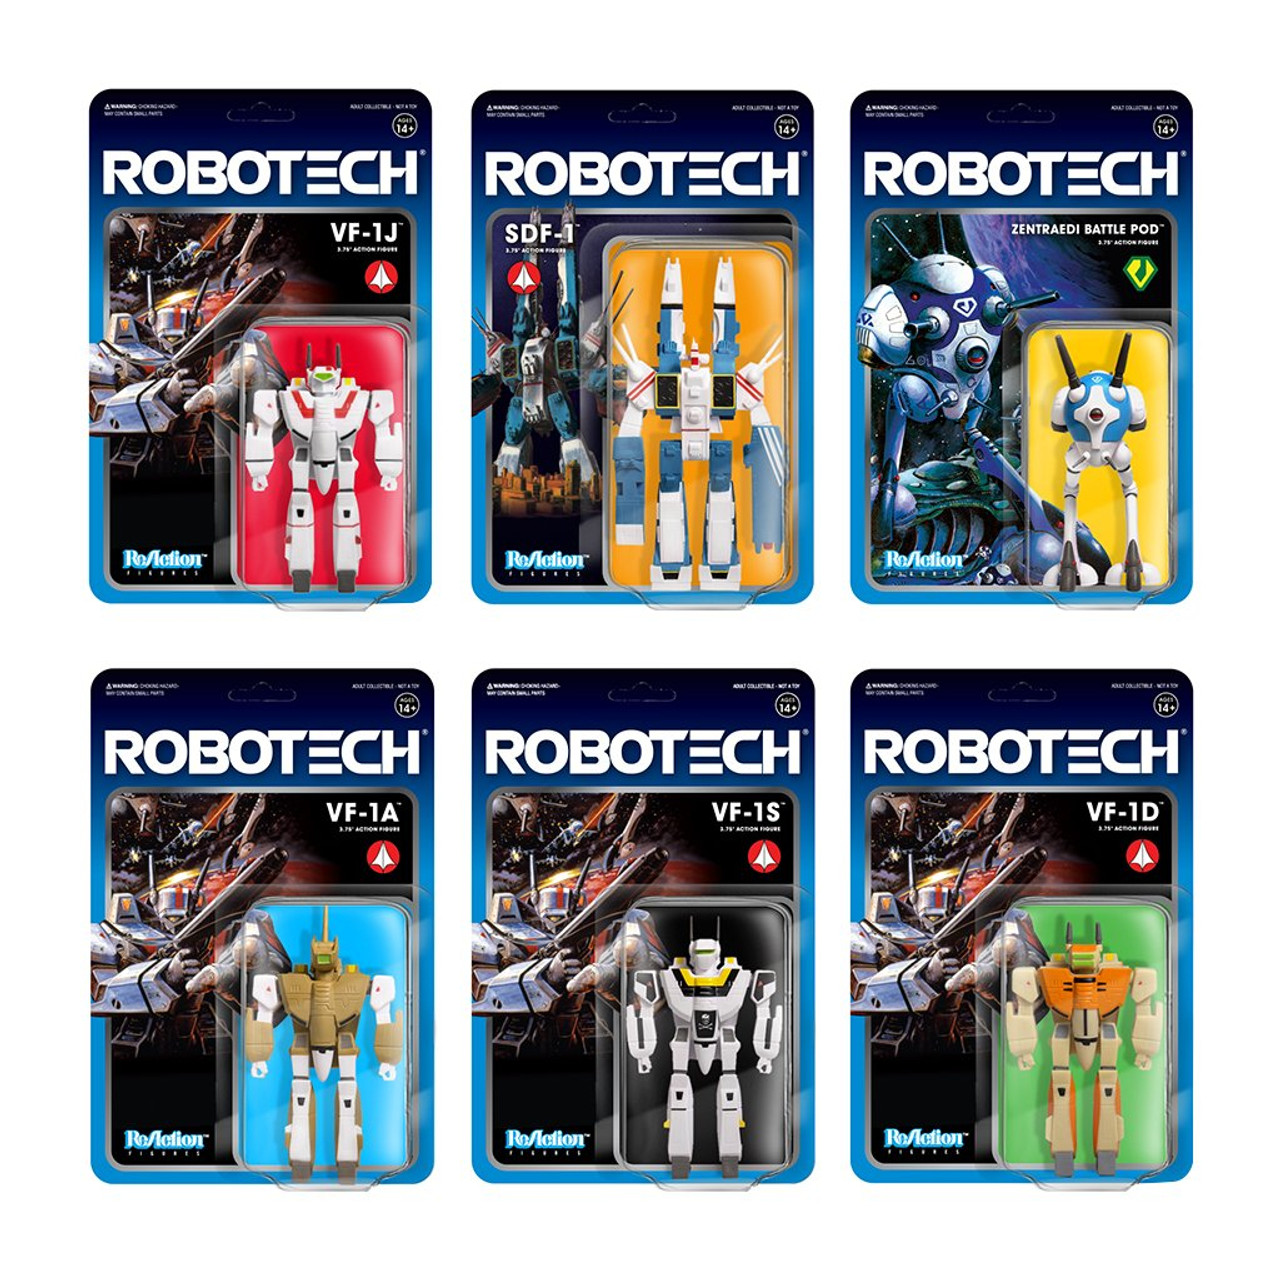 Reaction Robotech by Super7